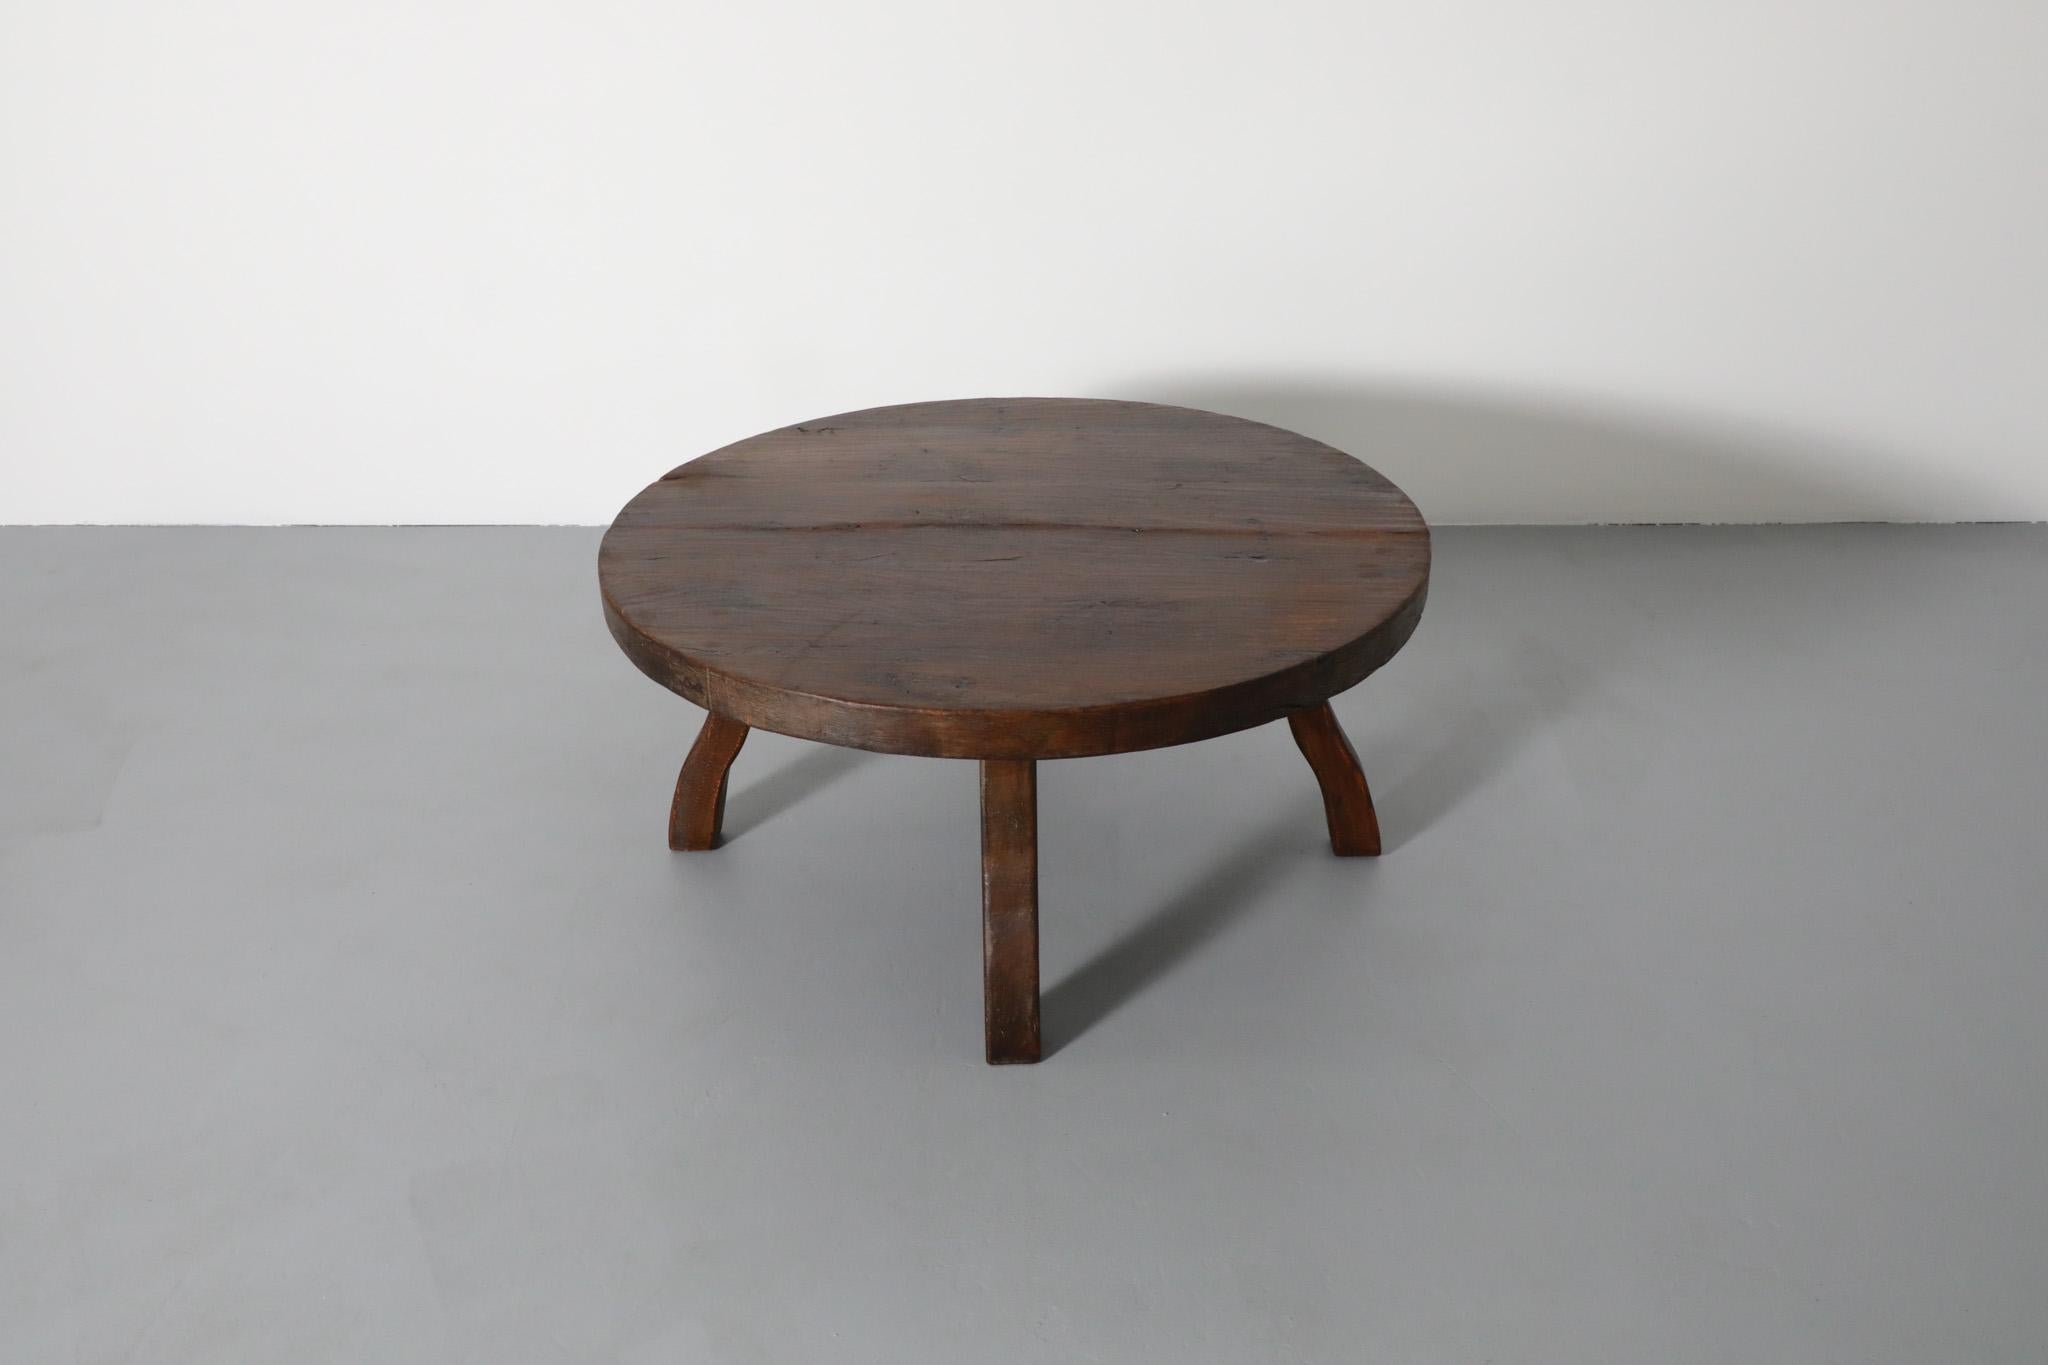 Mid-20th Century Pierre Chapo Style Brutalist Oak Coffee Table with Curved Legs